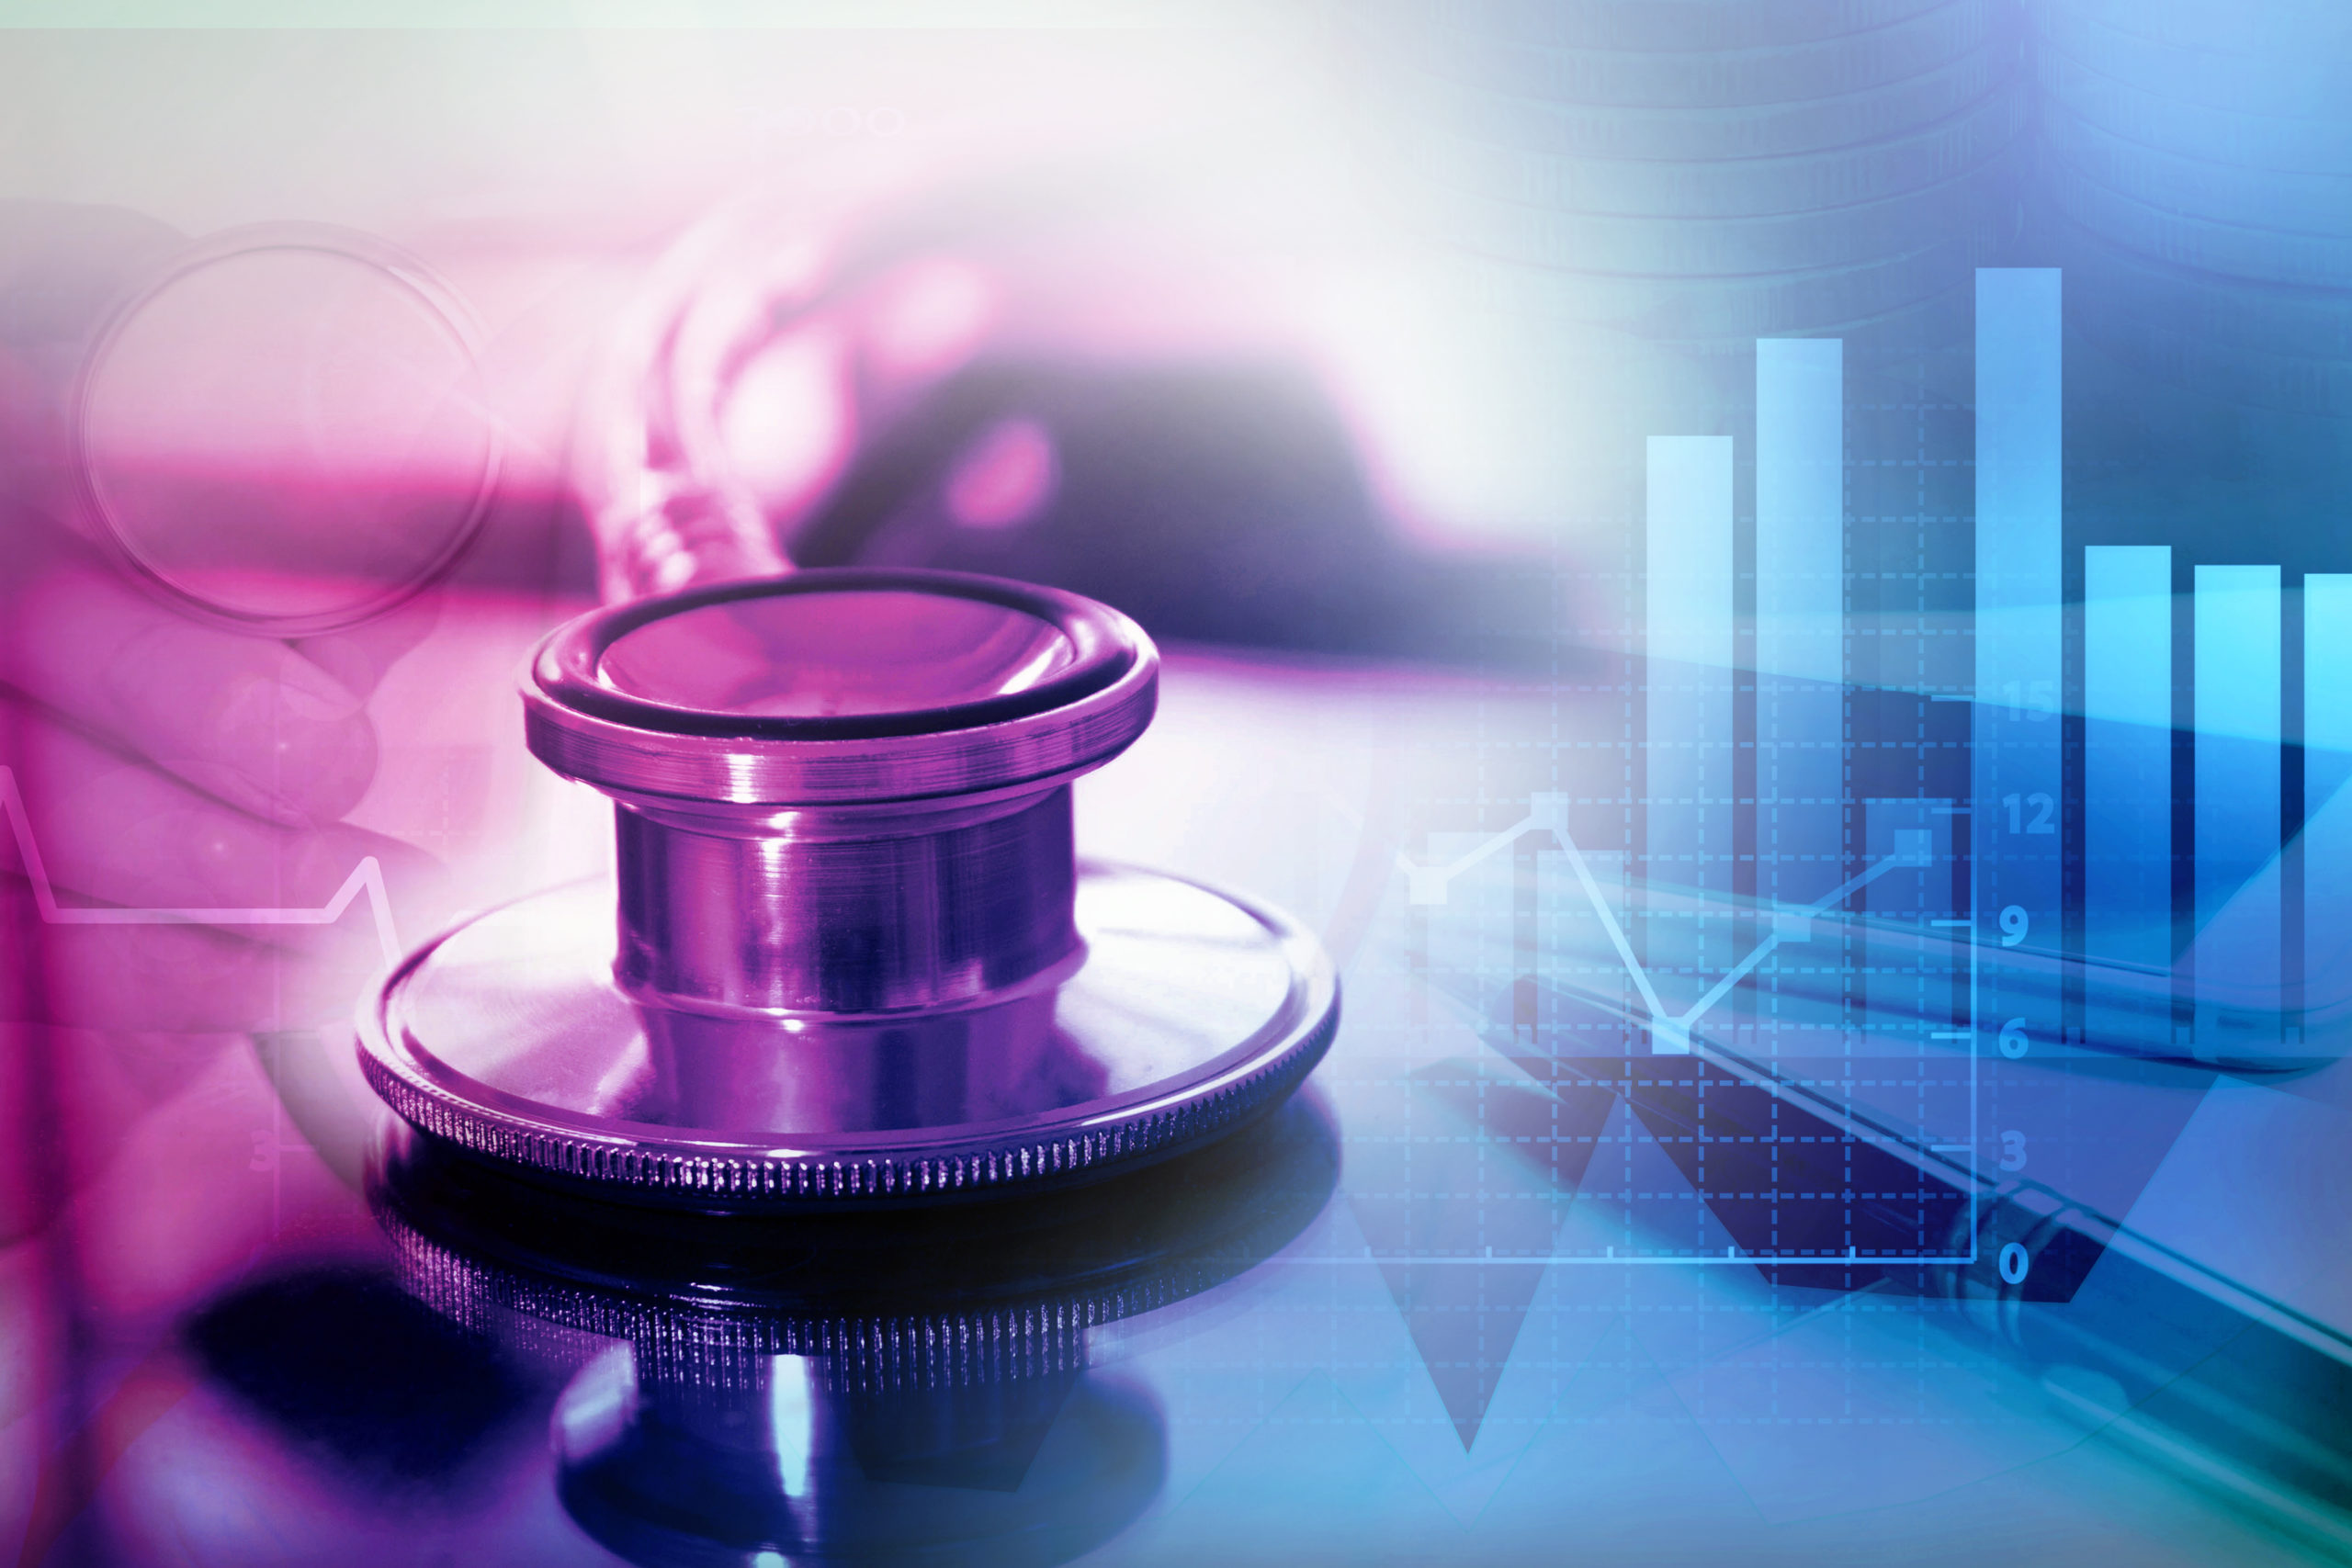 Top 3 Hospital Revenue Management Benchmarks to Analyze This Year